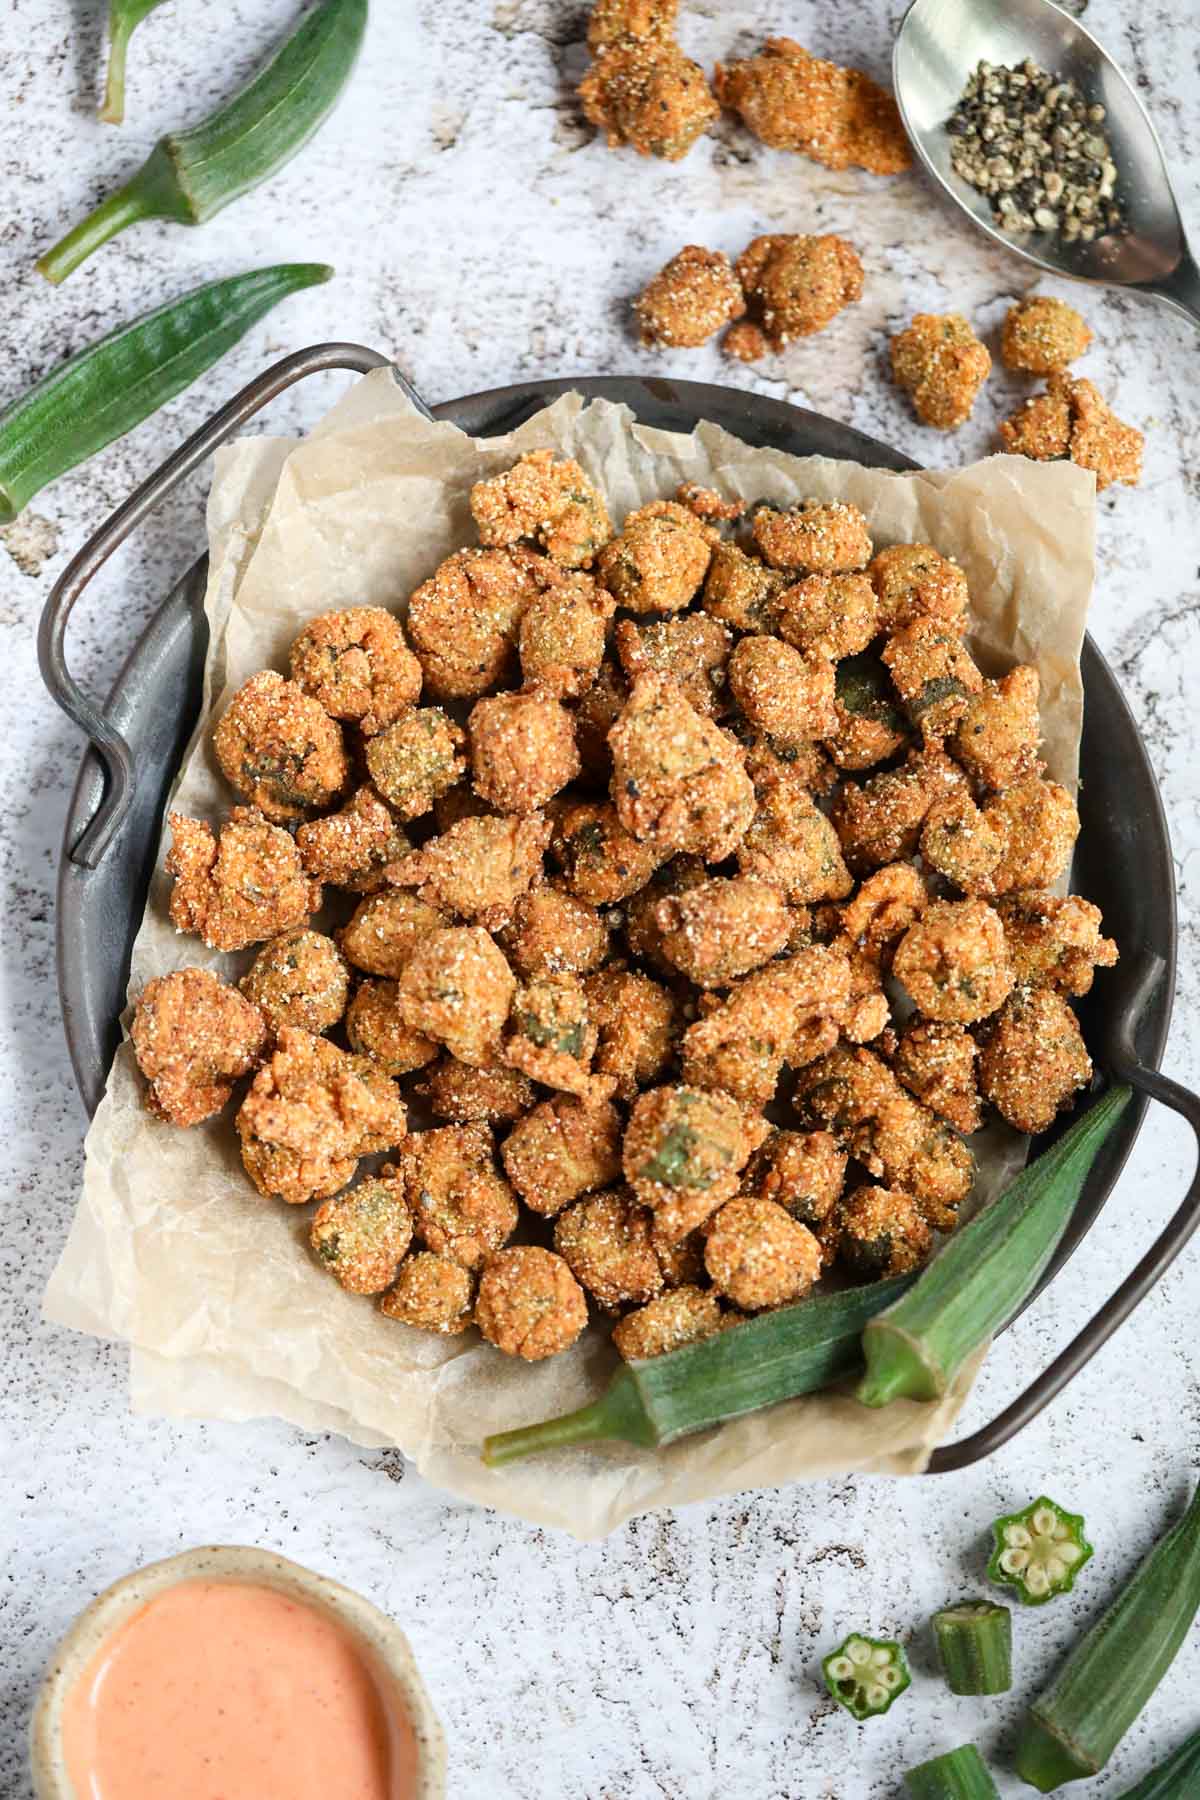 Southern fried okra on a metal tray sitting on a white surface.